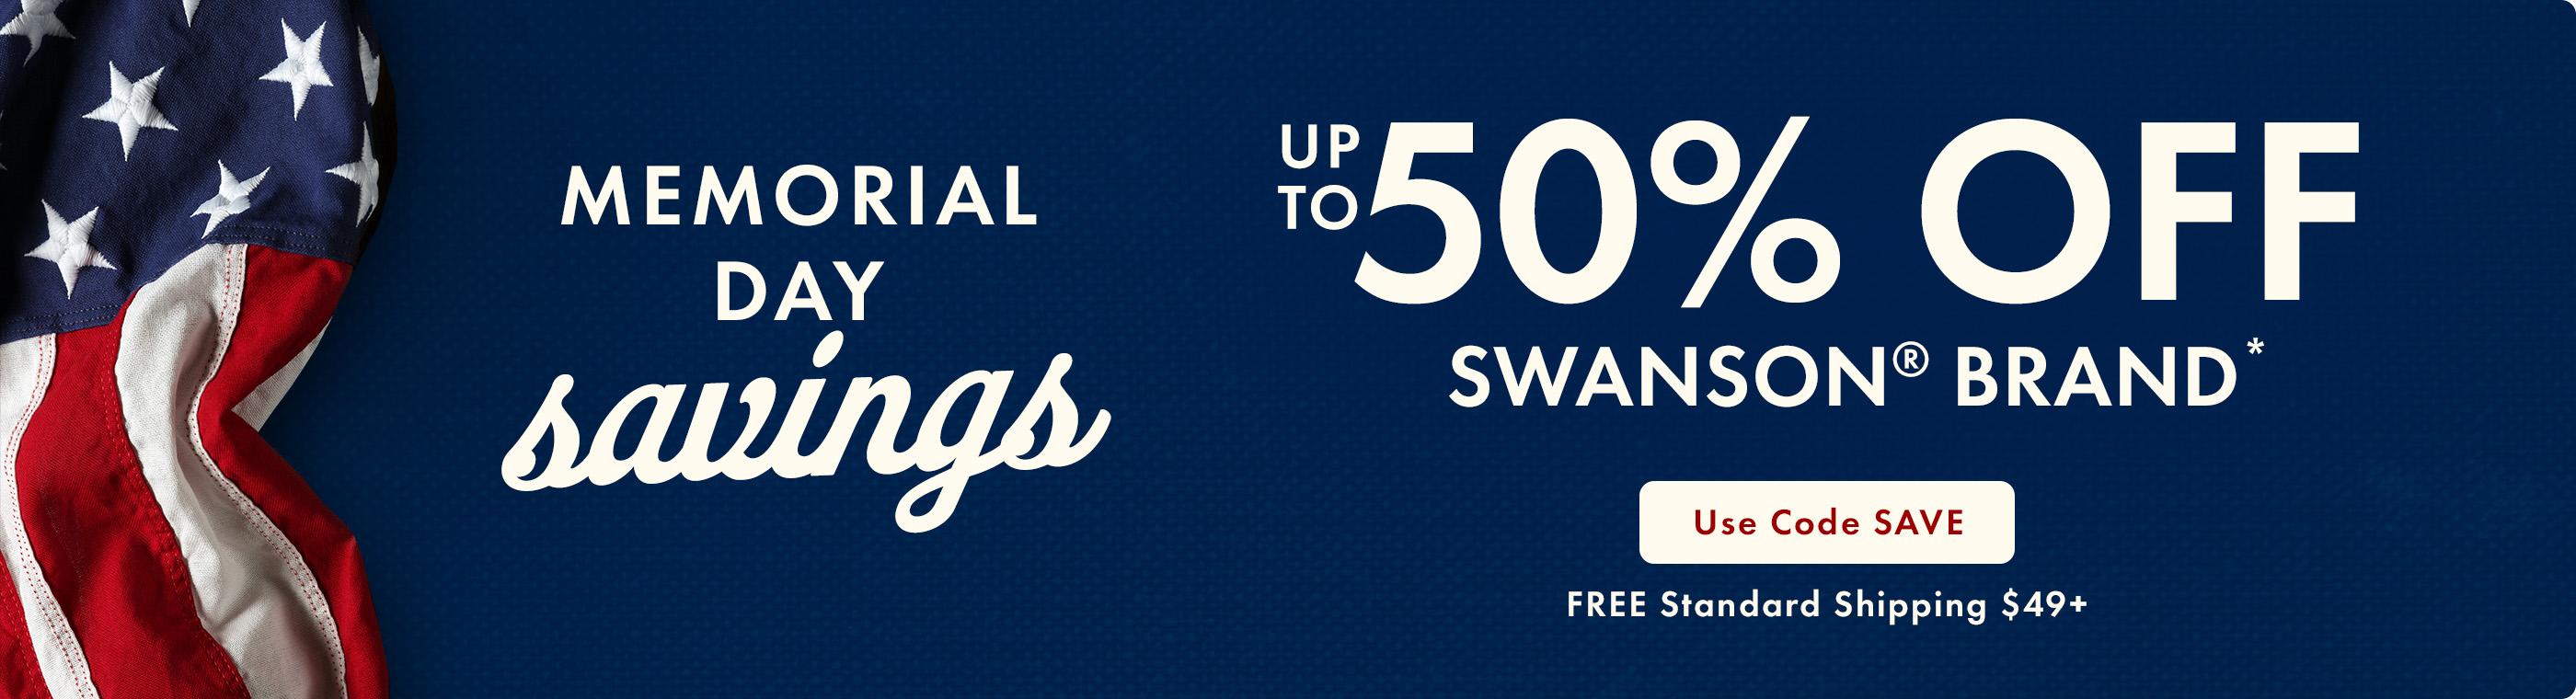 Up To 50% Off Swanson